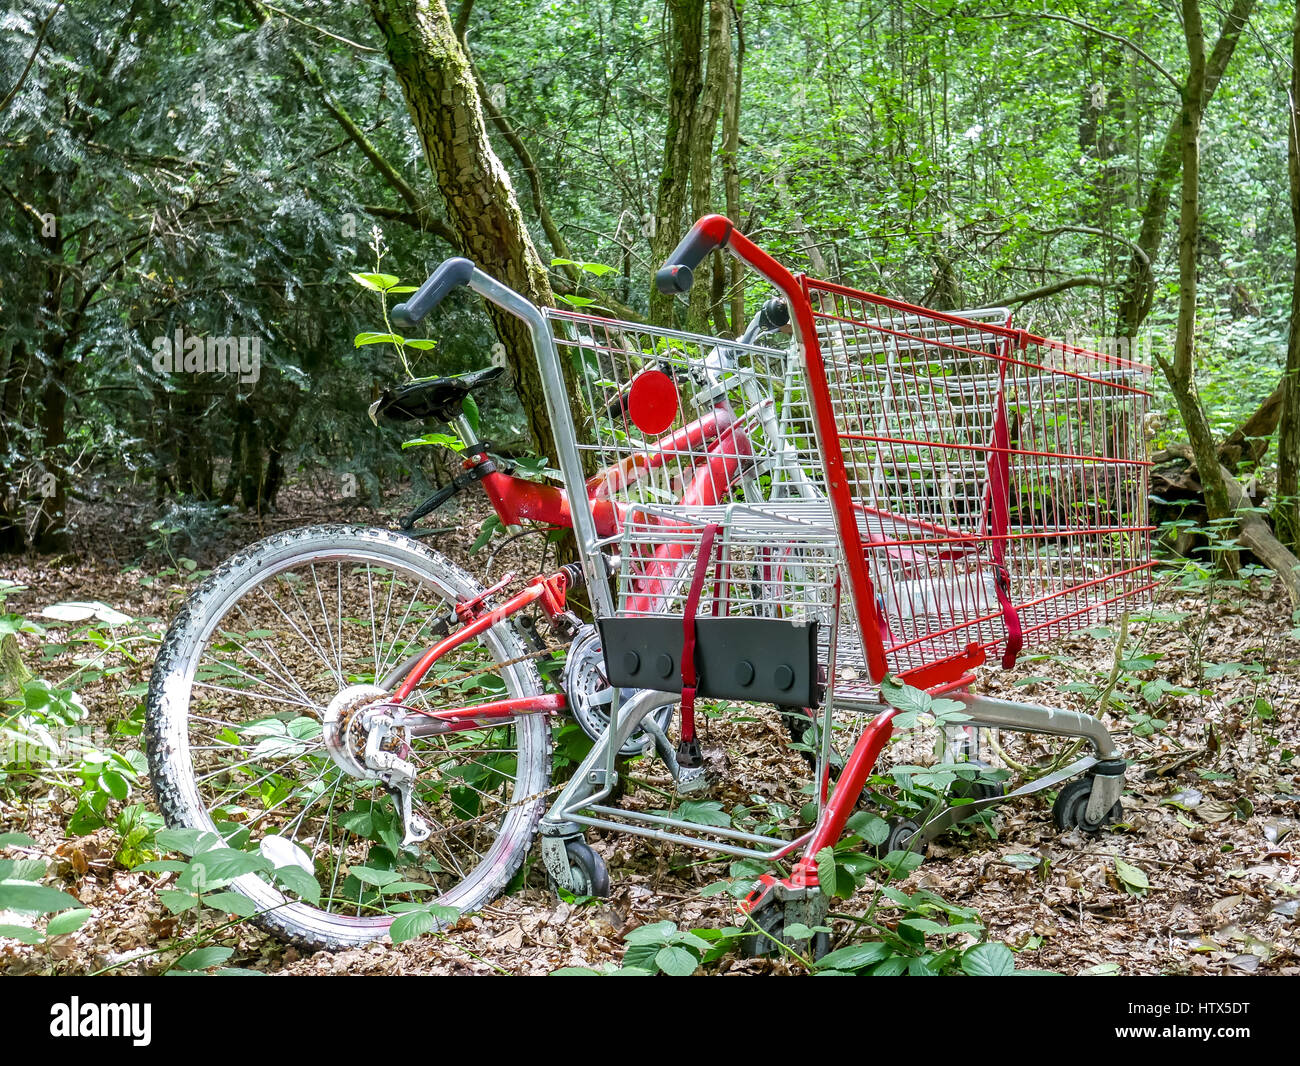 Red bicycle and shopping cart trolley abandoned in overgrown wood, London, England, UK Stock Photo